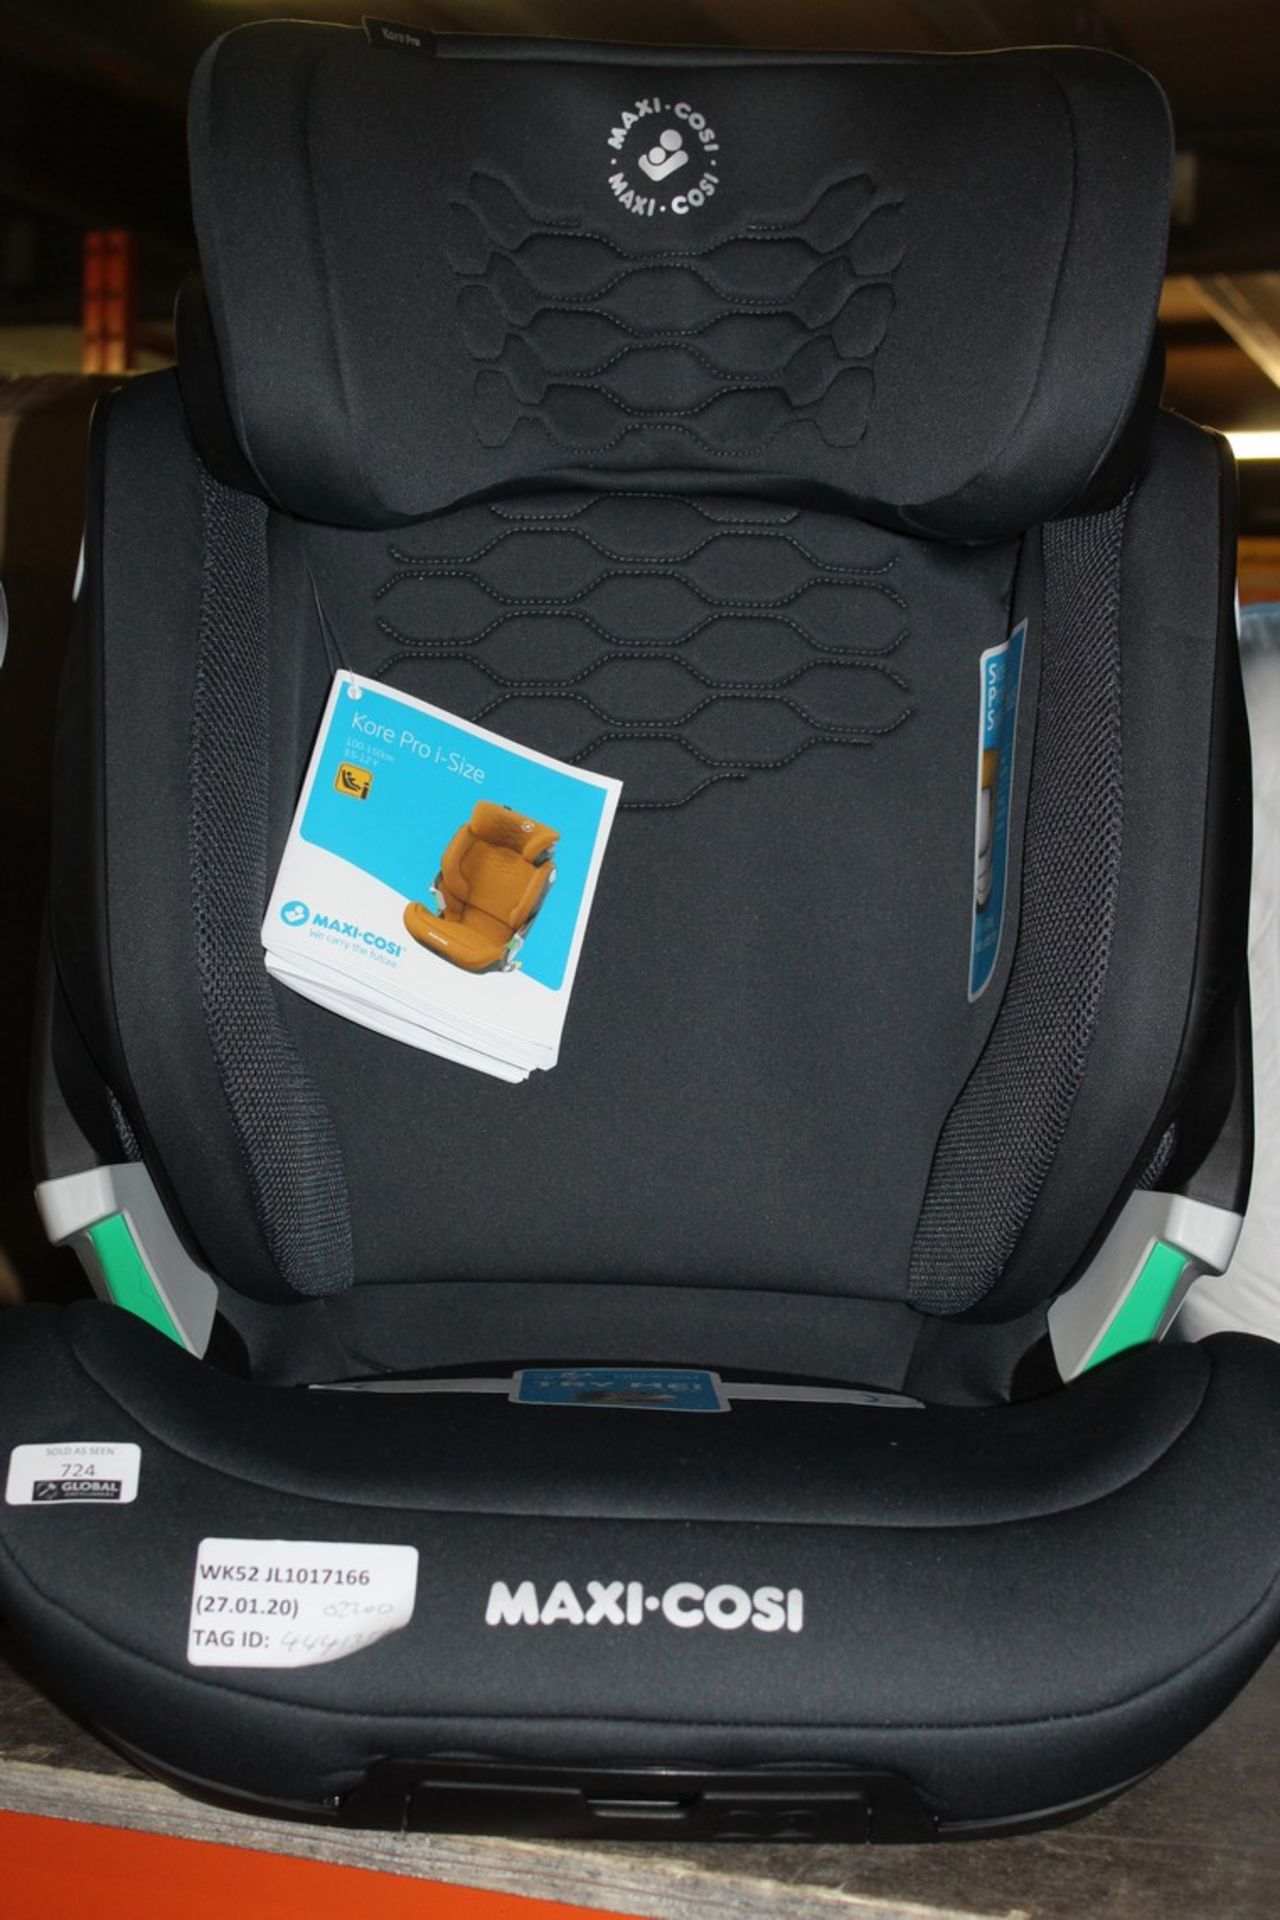 Maxi Cosi Core Pro I Size In Car Kids Safety Seat RRP £220 (4443451) (Public Viewing and